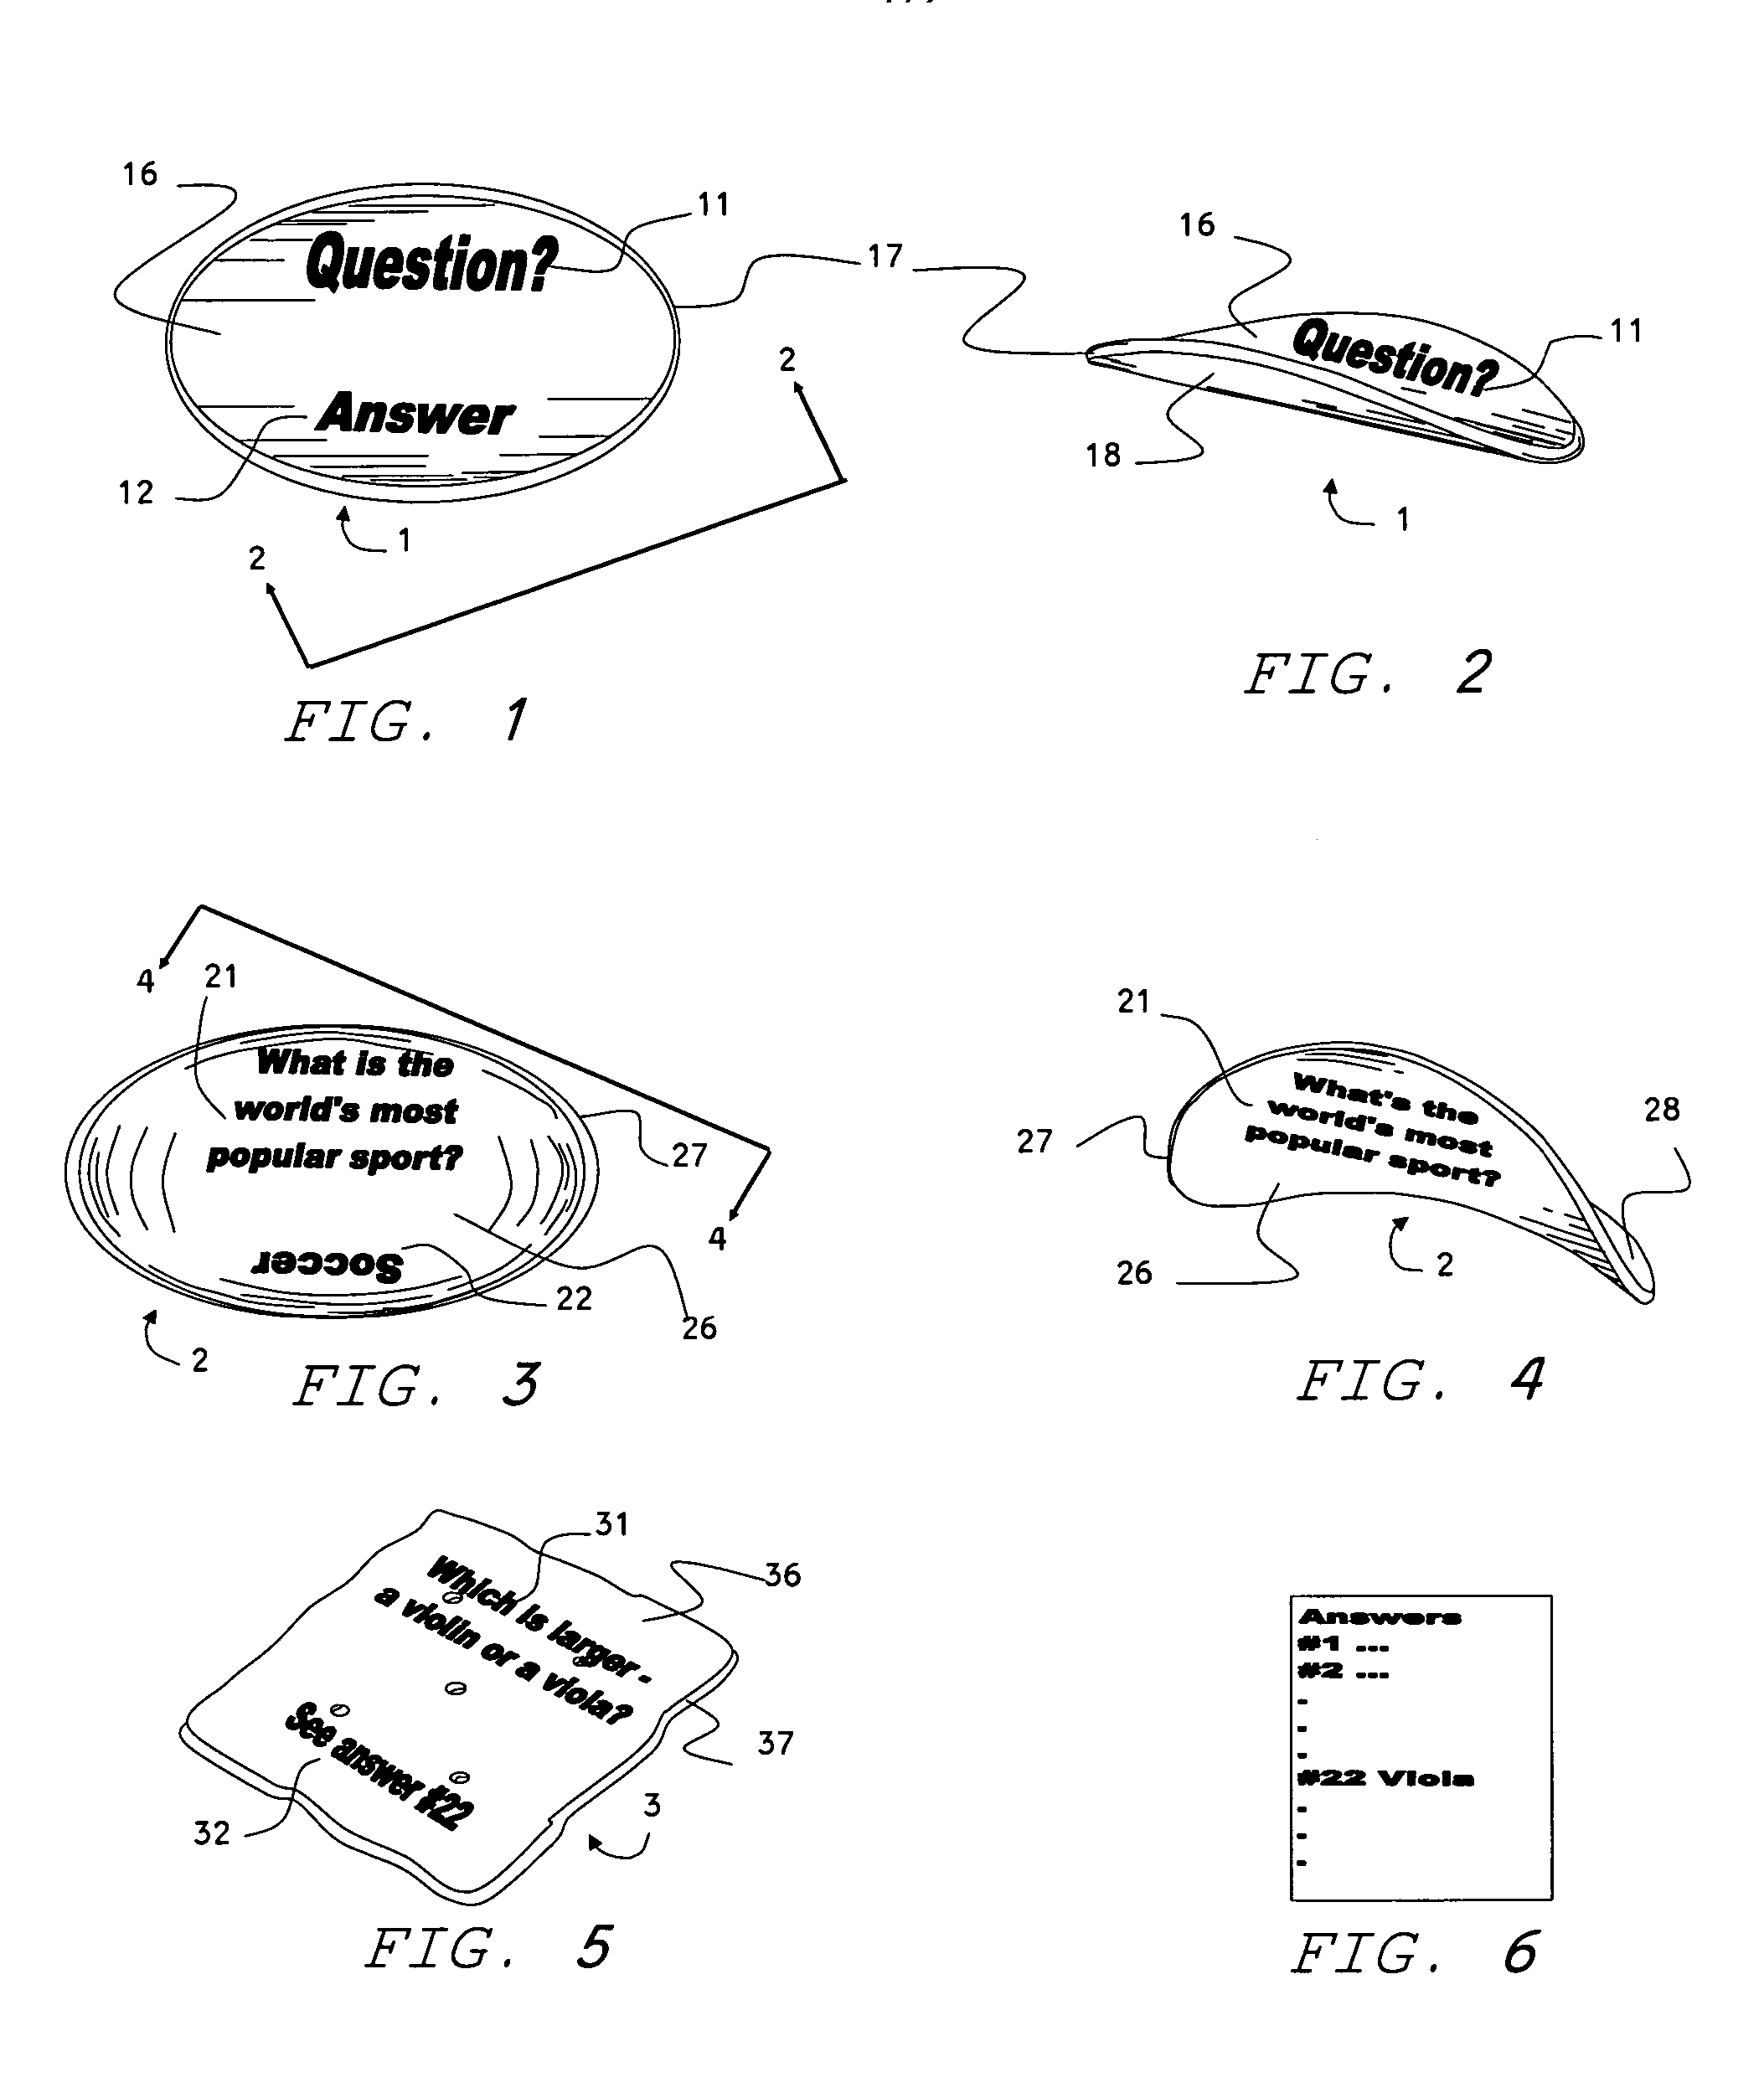 Article of commerce comprising edible substrate and game elements